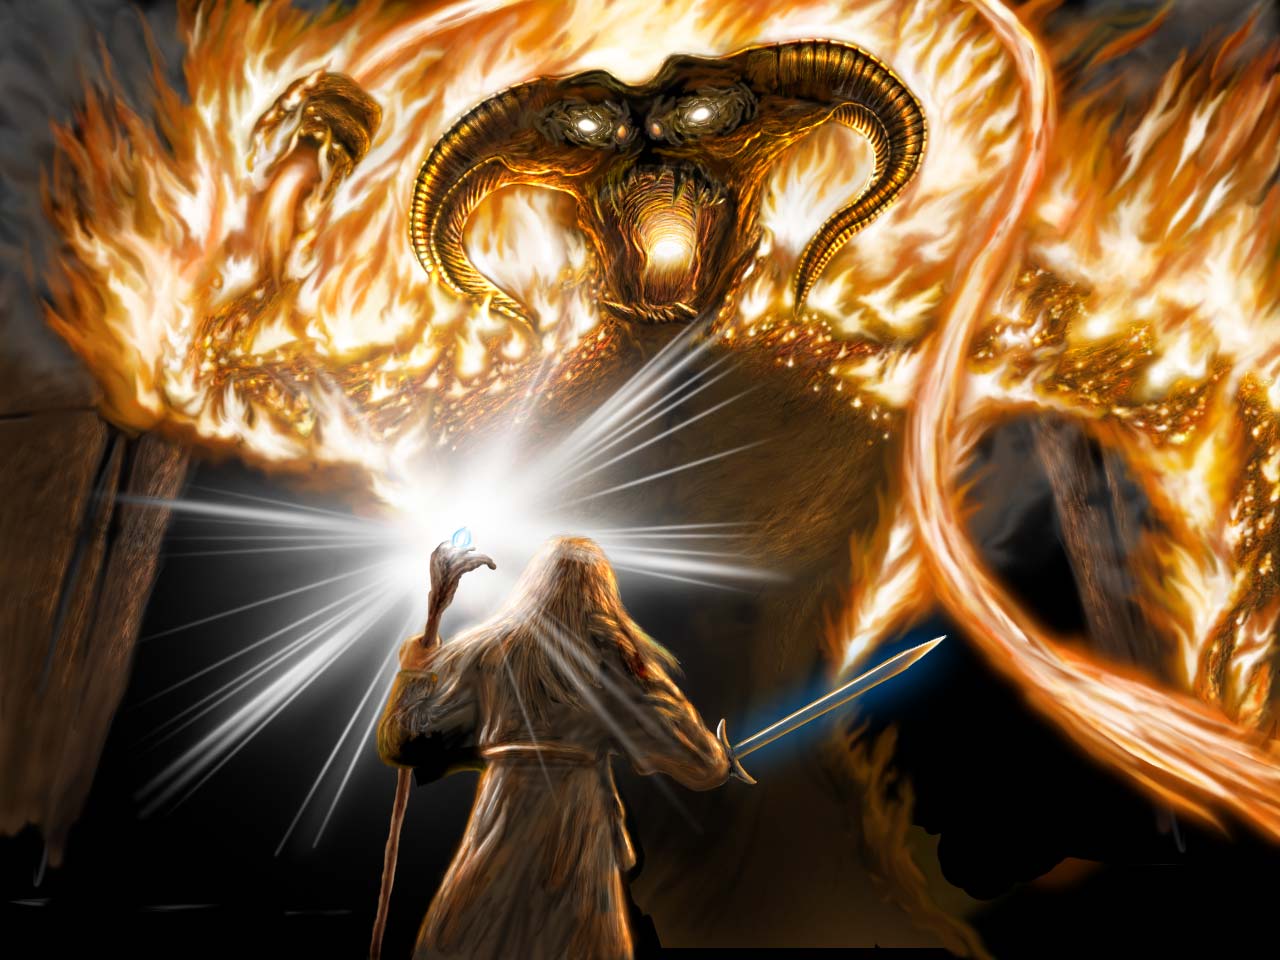 Balrog Gandalf Wallpaper The Lord Of